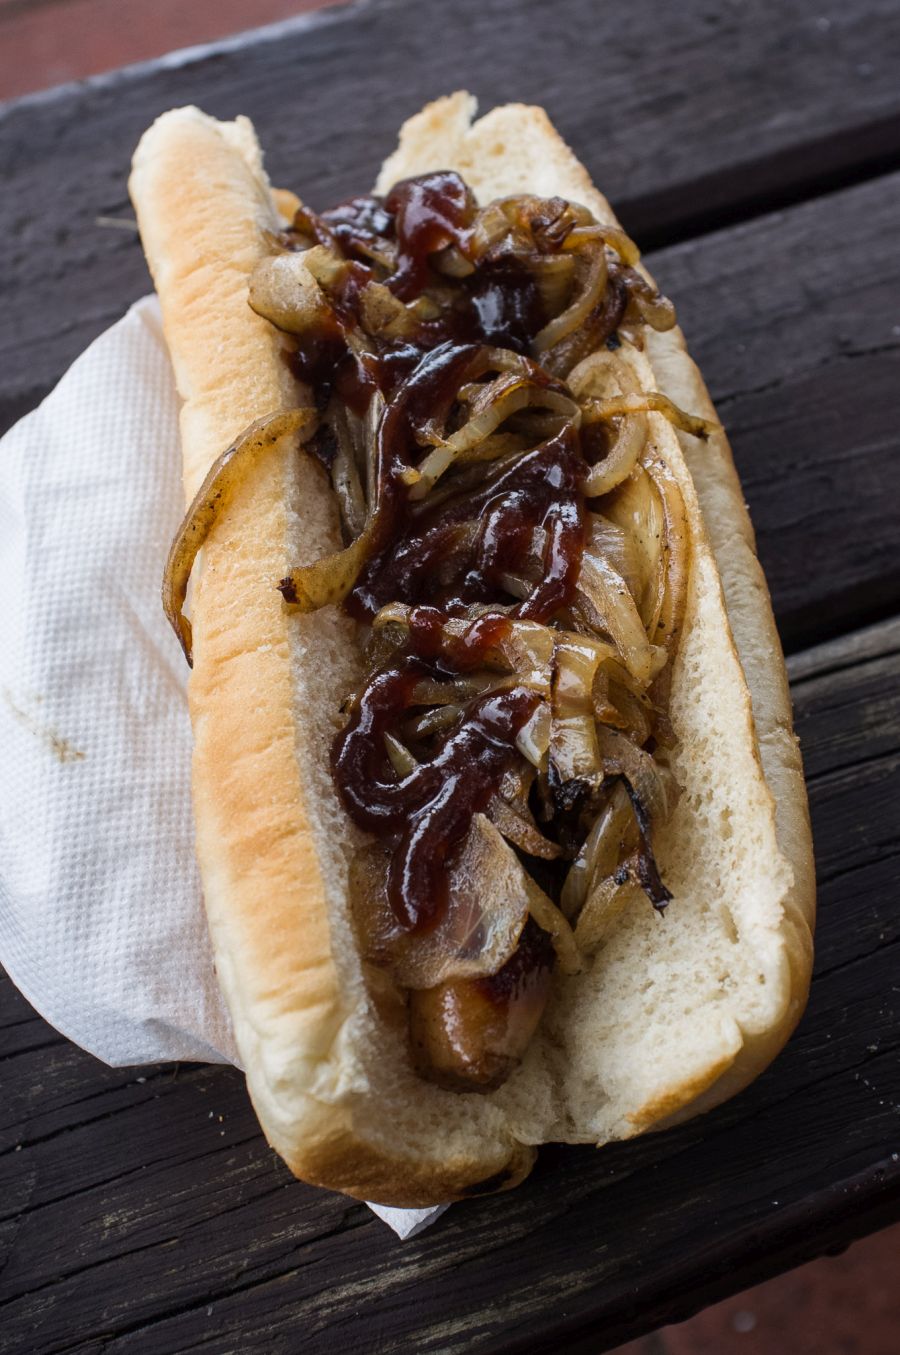 My sausage sizzle: sausage, extra onions, barbecue sauce